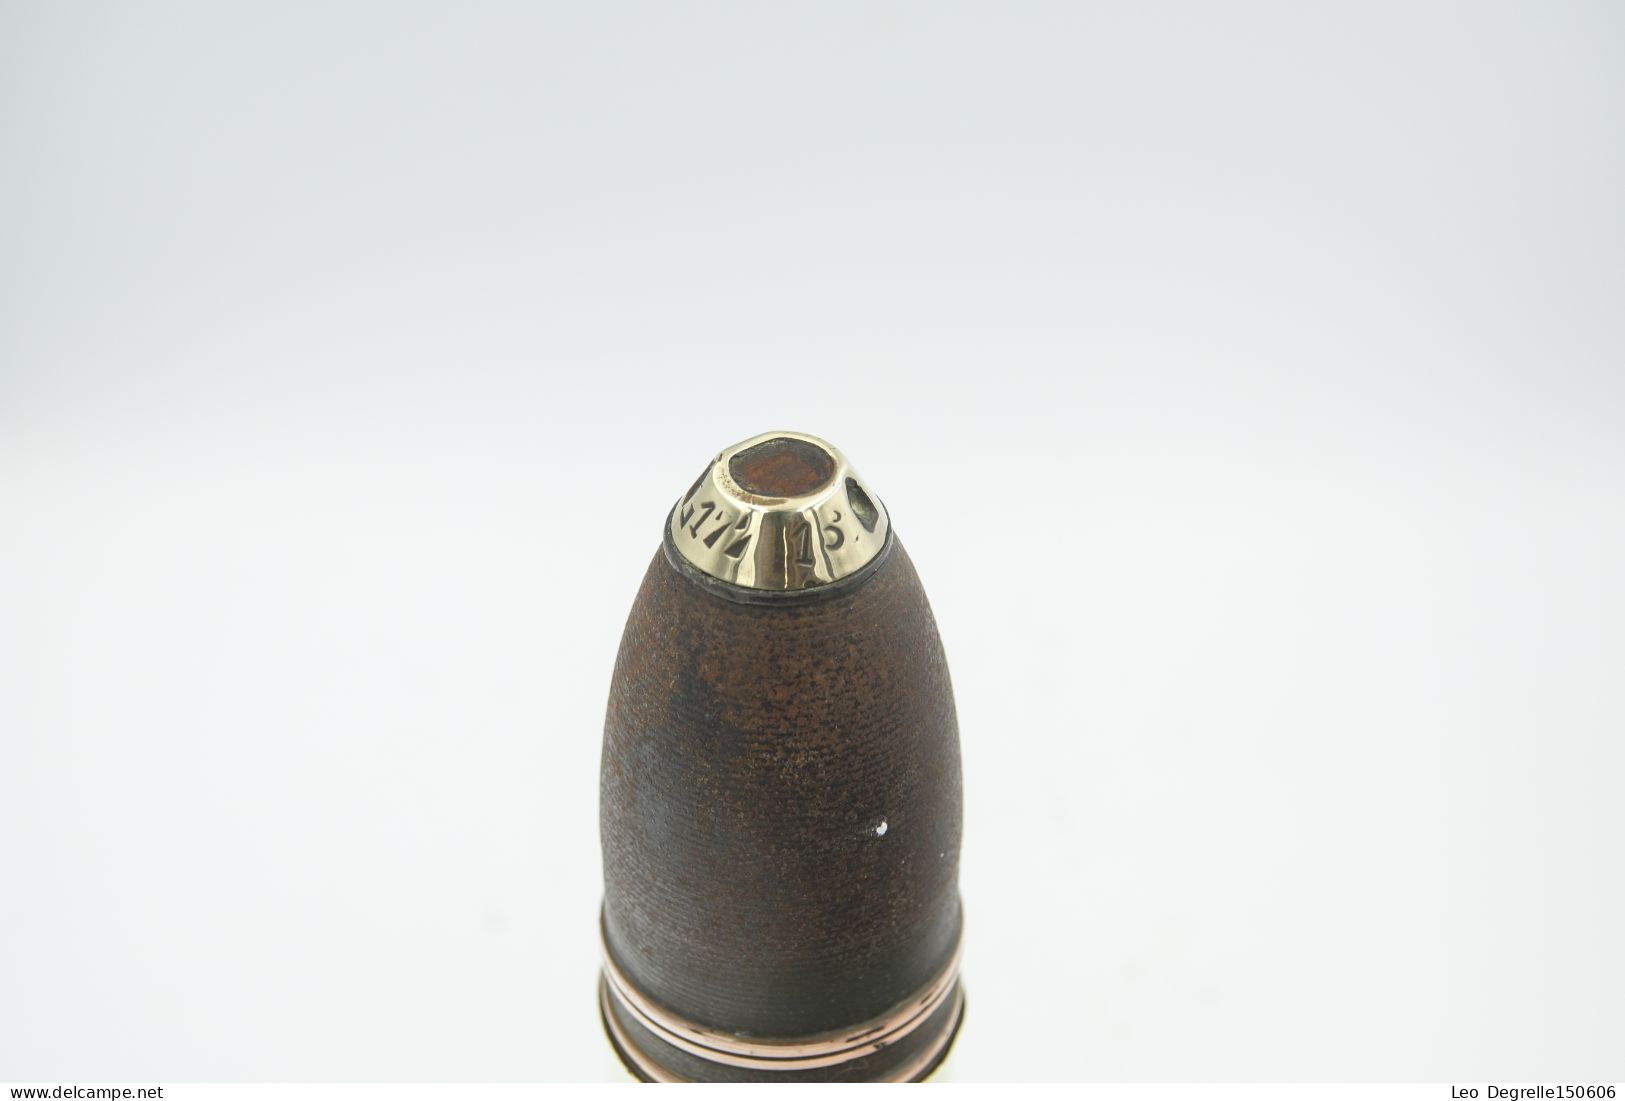 Militaria - Ammunition : Original French Model 1888 37MM High Explosive - WW1 1916 - Weapon Deactivated Shell - L = 17 - Decorative Weapons